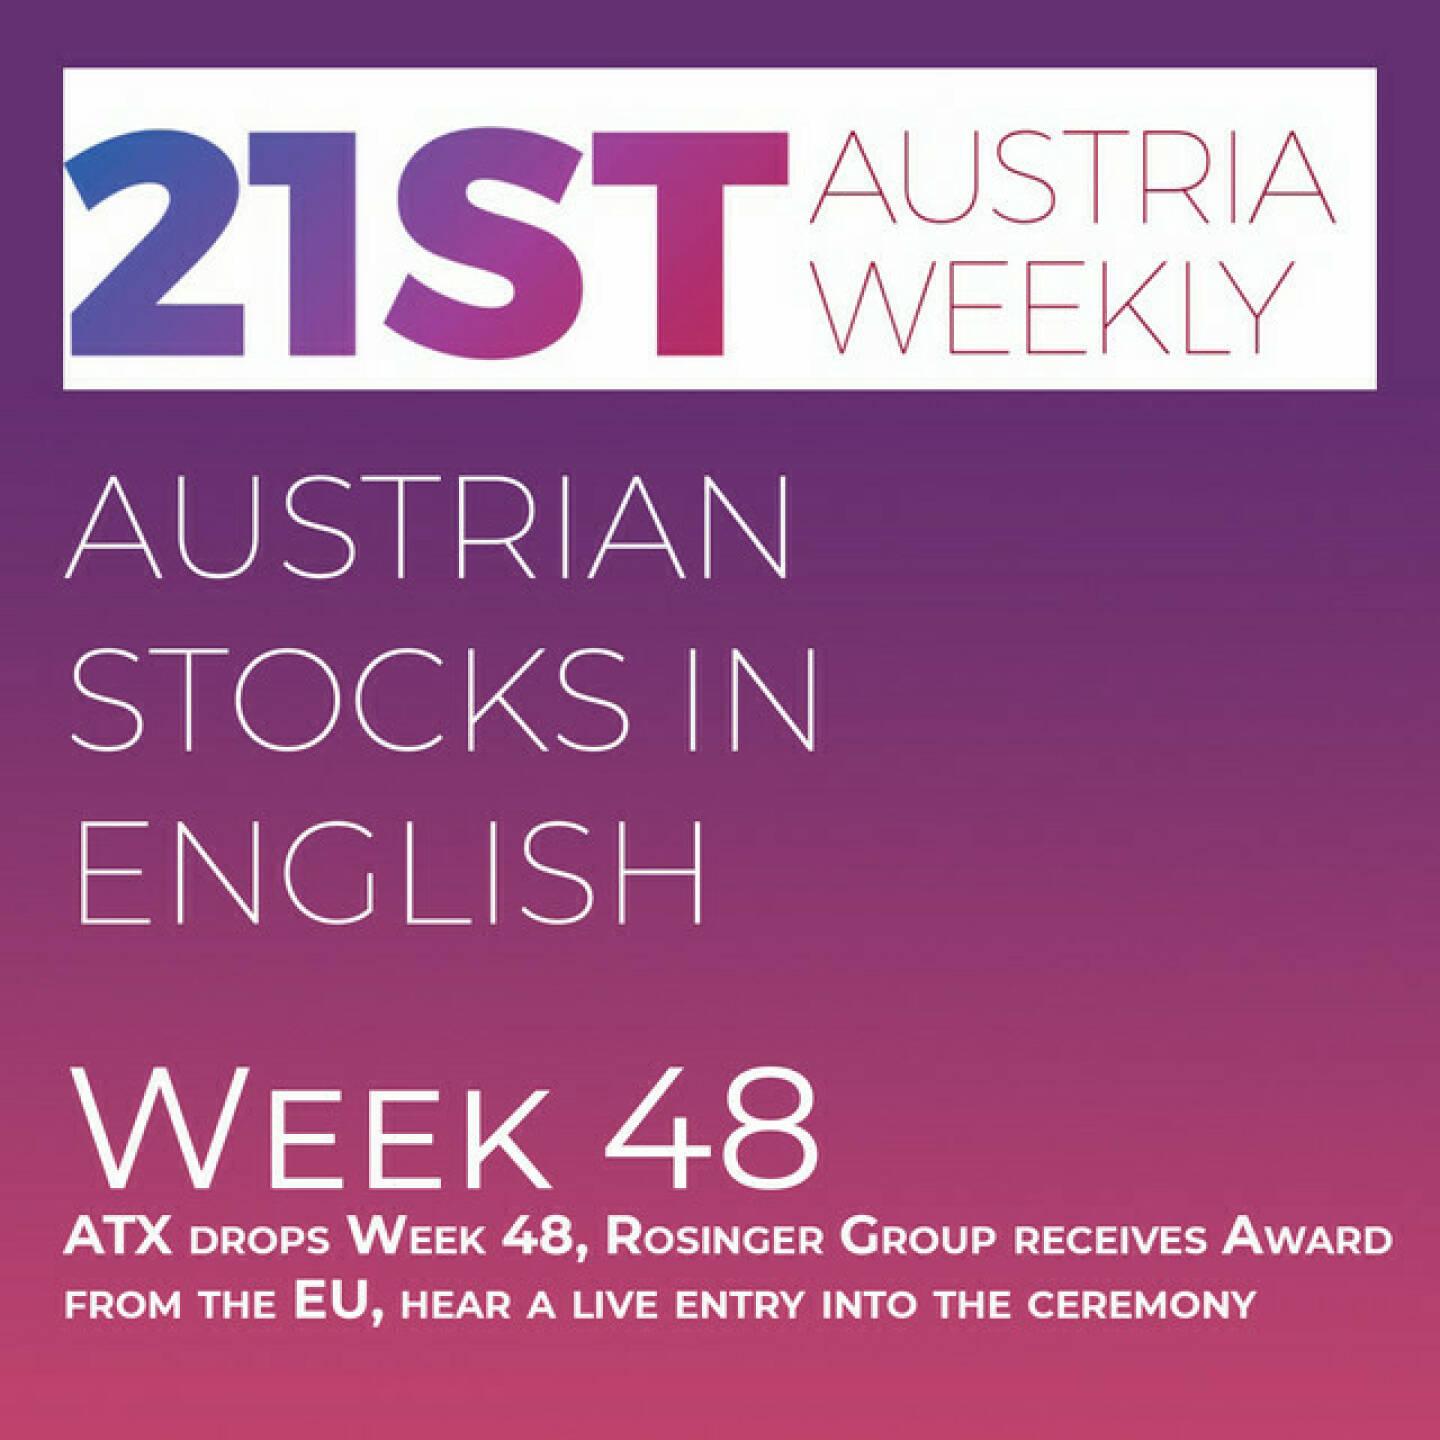 https://open.spotify.com/episode/6mzT7t1ICbIDNxAlUuTWqG
Austrian Stocks in English: ATX drops Week 48, Rosinger Group receives Award from the EU, hear a live entry into the ceremony - Welcome to &#34;Austrian Stocks in English - presented by Palfinger&#34;, the new and weekly english spoken Summary for the Austrian Stock Market, positioned every Sunday in the mostly german languaged Podcast &#34; Christian Drastil - Wiener Börse, Sport Musik und Mehr“ . <br/>After a series of strong weeks ATX TR dropped in week 48 about 1,8 percent. Best Austrian Stocks were Warimpex, Frequentis and Porr. <br/>A longtime Partner of us, Rosinger Group, wins the Special Mention Award form European Commission, Federation of European Securities Exchanges (FESE) and European Issuers. We have a live from entry from the ceremony.<br/>News came from S Immo, Porr, Wolford (2), Agrana, Warimpex, Andritz (3), VIG (2), FACC, Palfinger, Valneva, ams Osram and Kapsch TrafficCom . Spoken now by the absolutely smart Allison. <br/>Please rate my Podcast on Apple Podcasts (or Spotify): https://podcasts.apple.com/at/podcast/christian-drastil-wiener-borse-sport-musik-und-mehr-my-life/id1484919130 . And please spread the word : https://www.boerse-social.com/21staustria - the address to subscribe to the weekly summary as a PDF.